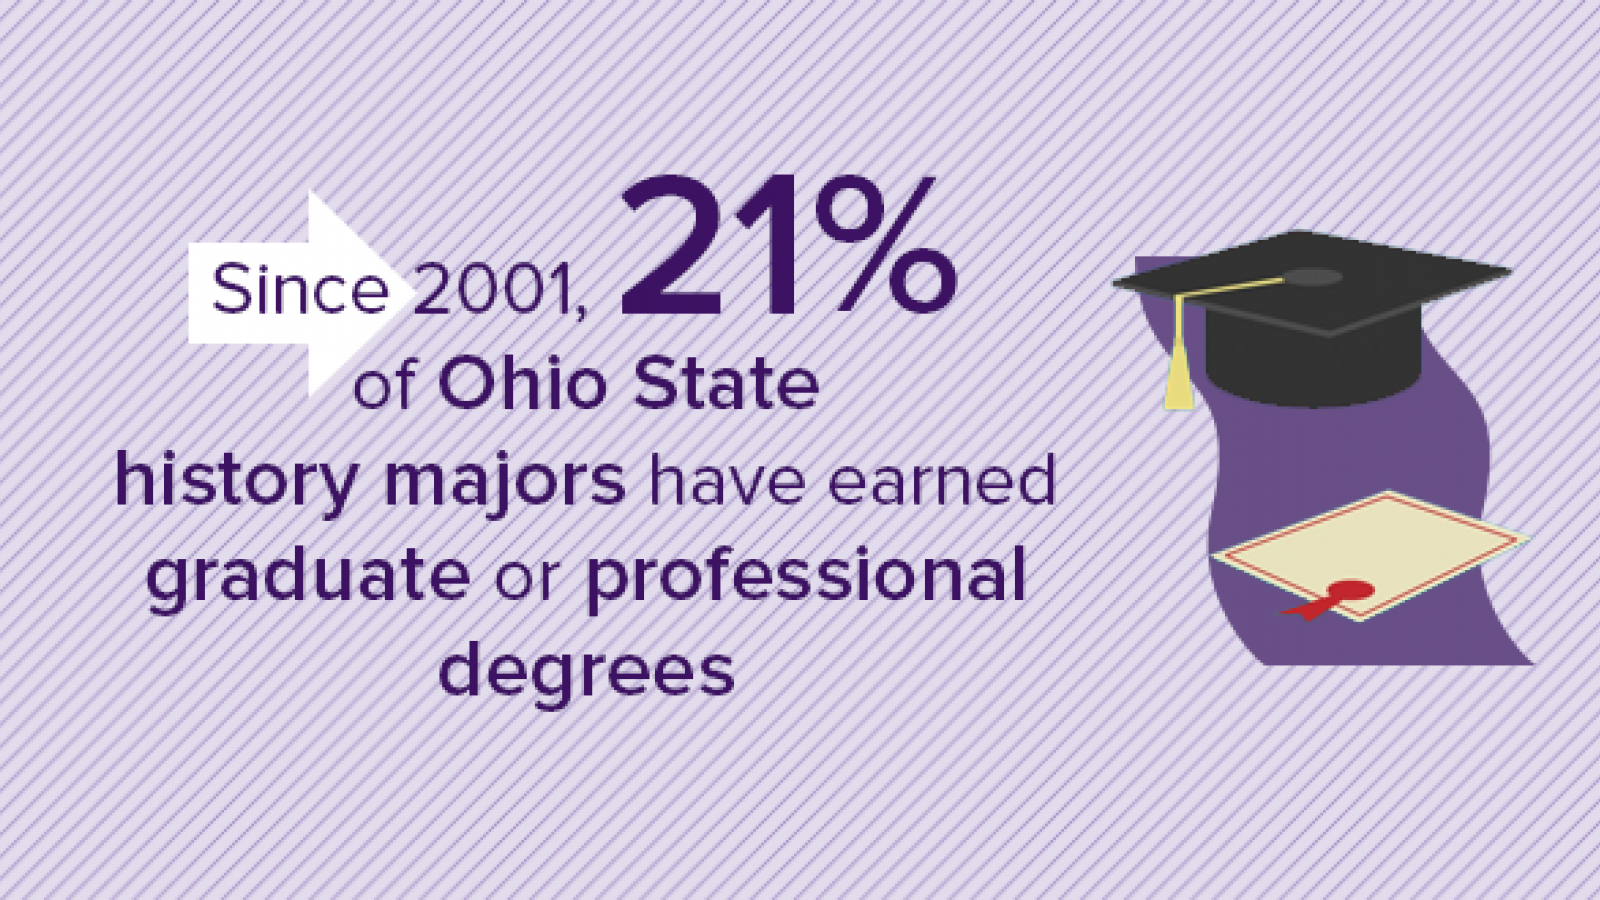 Since 2001 21% of Ohio State history majors have earned graduate or professional degrees